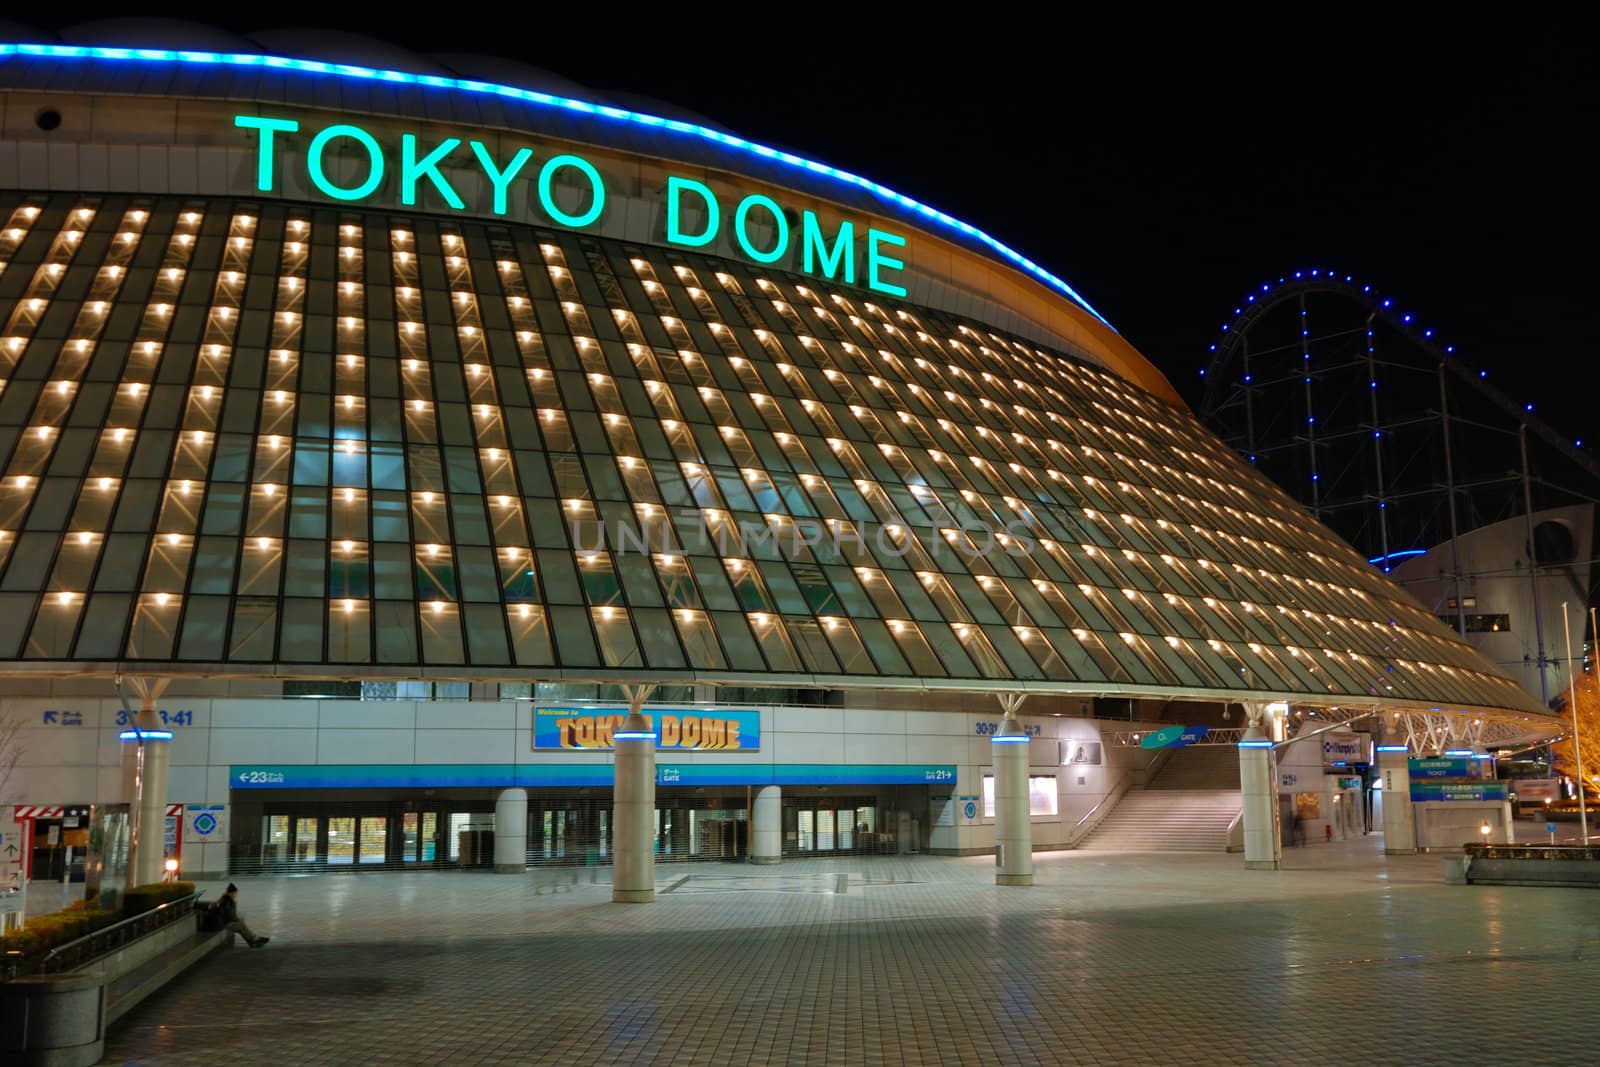 Tokyo, Japan - February 14, 2008: famous Tokyo Dome arena building in Korakuen district of Japanese capital with scenic evening illumination. Also Tokyo Dome is known as largest concert hall in Japan.